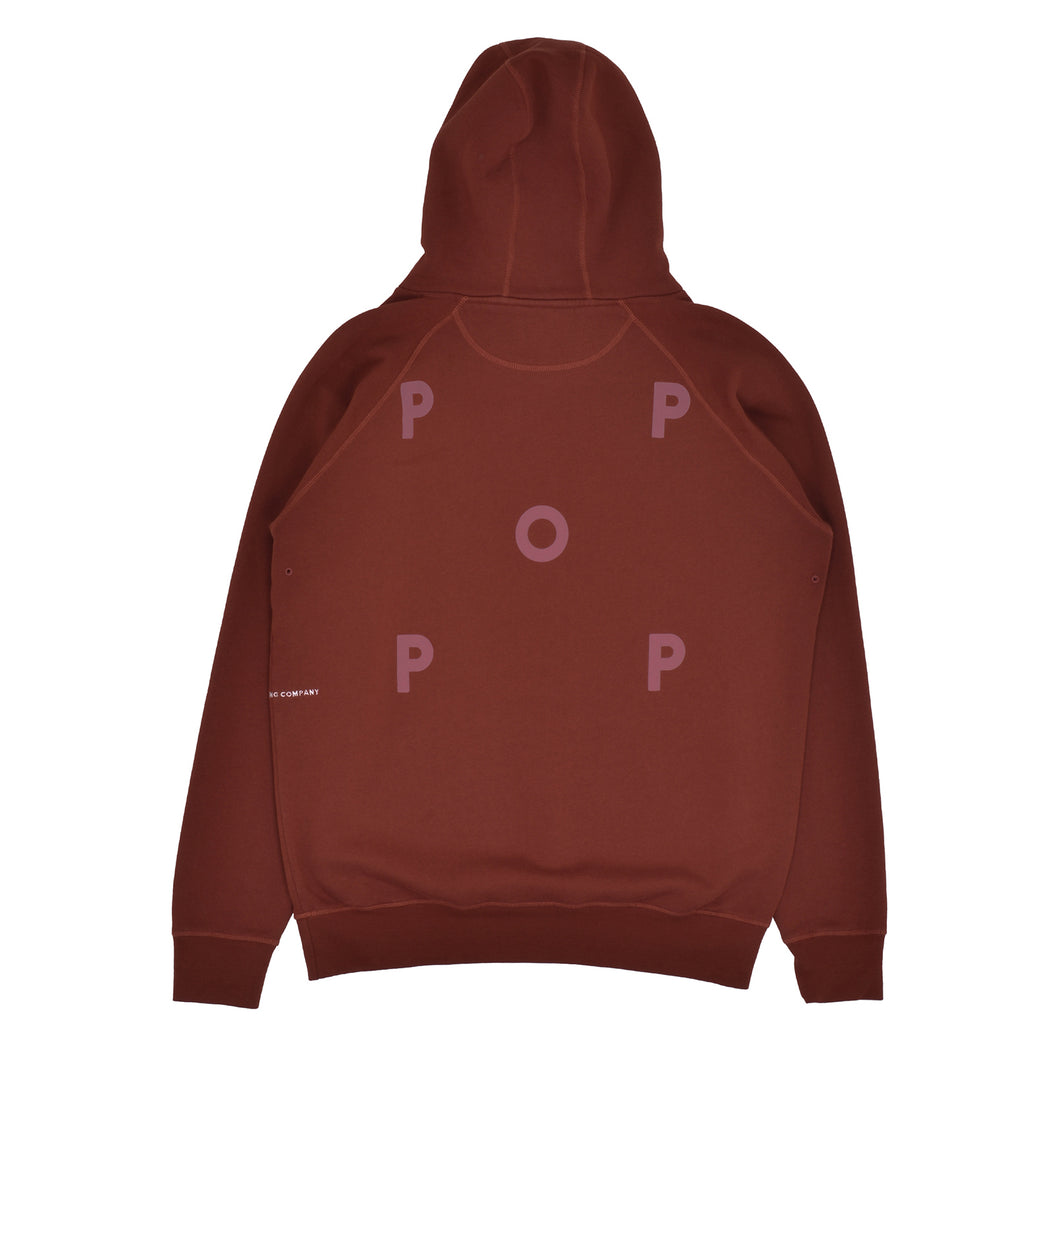 POP TRADING CO. - 